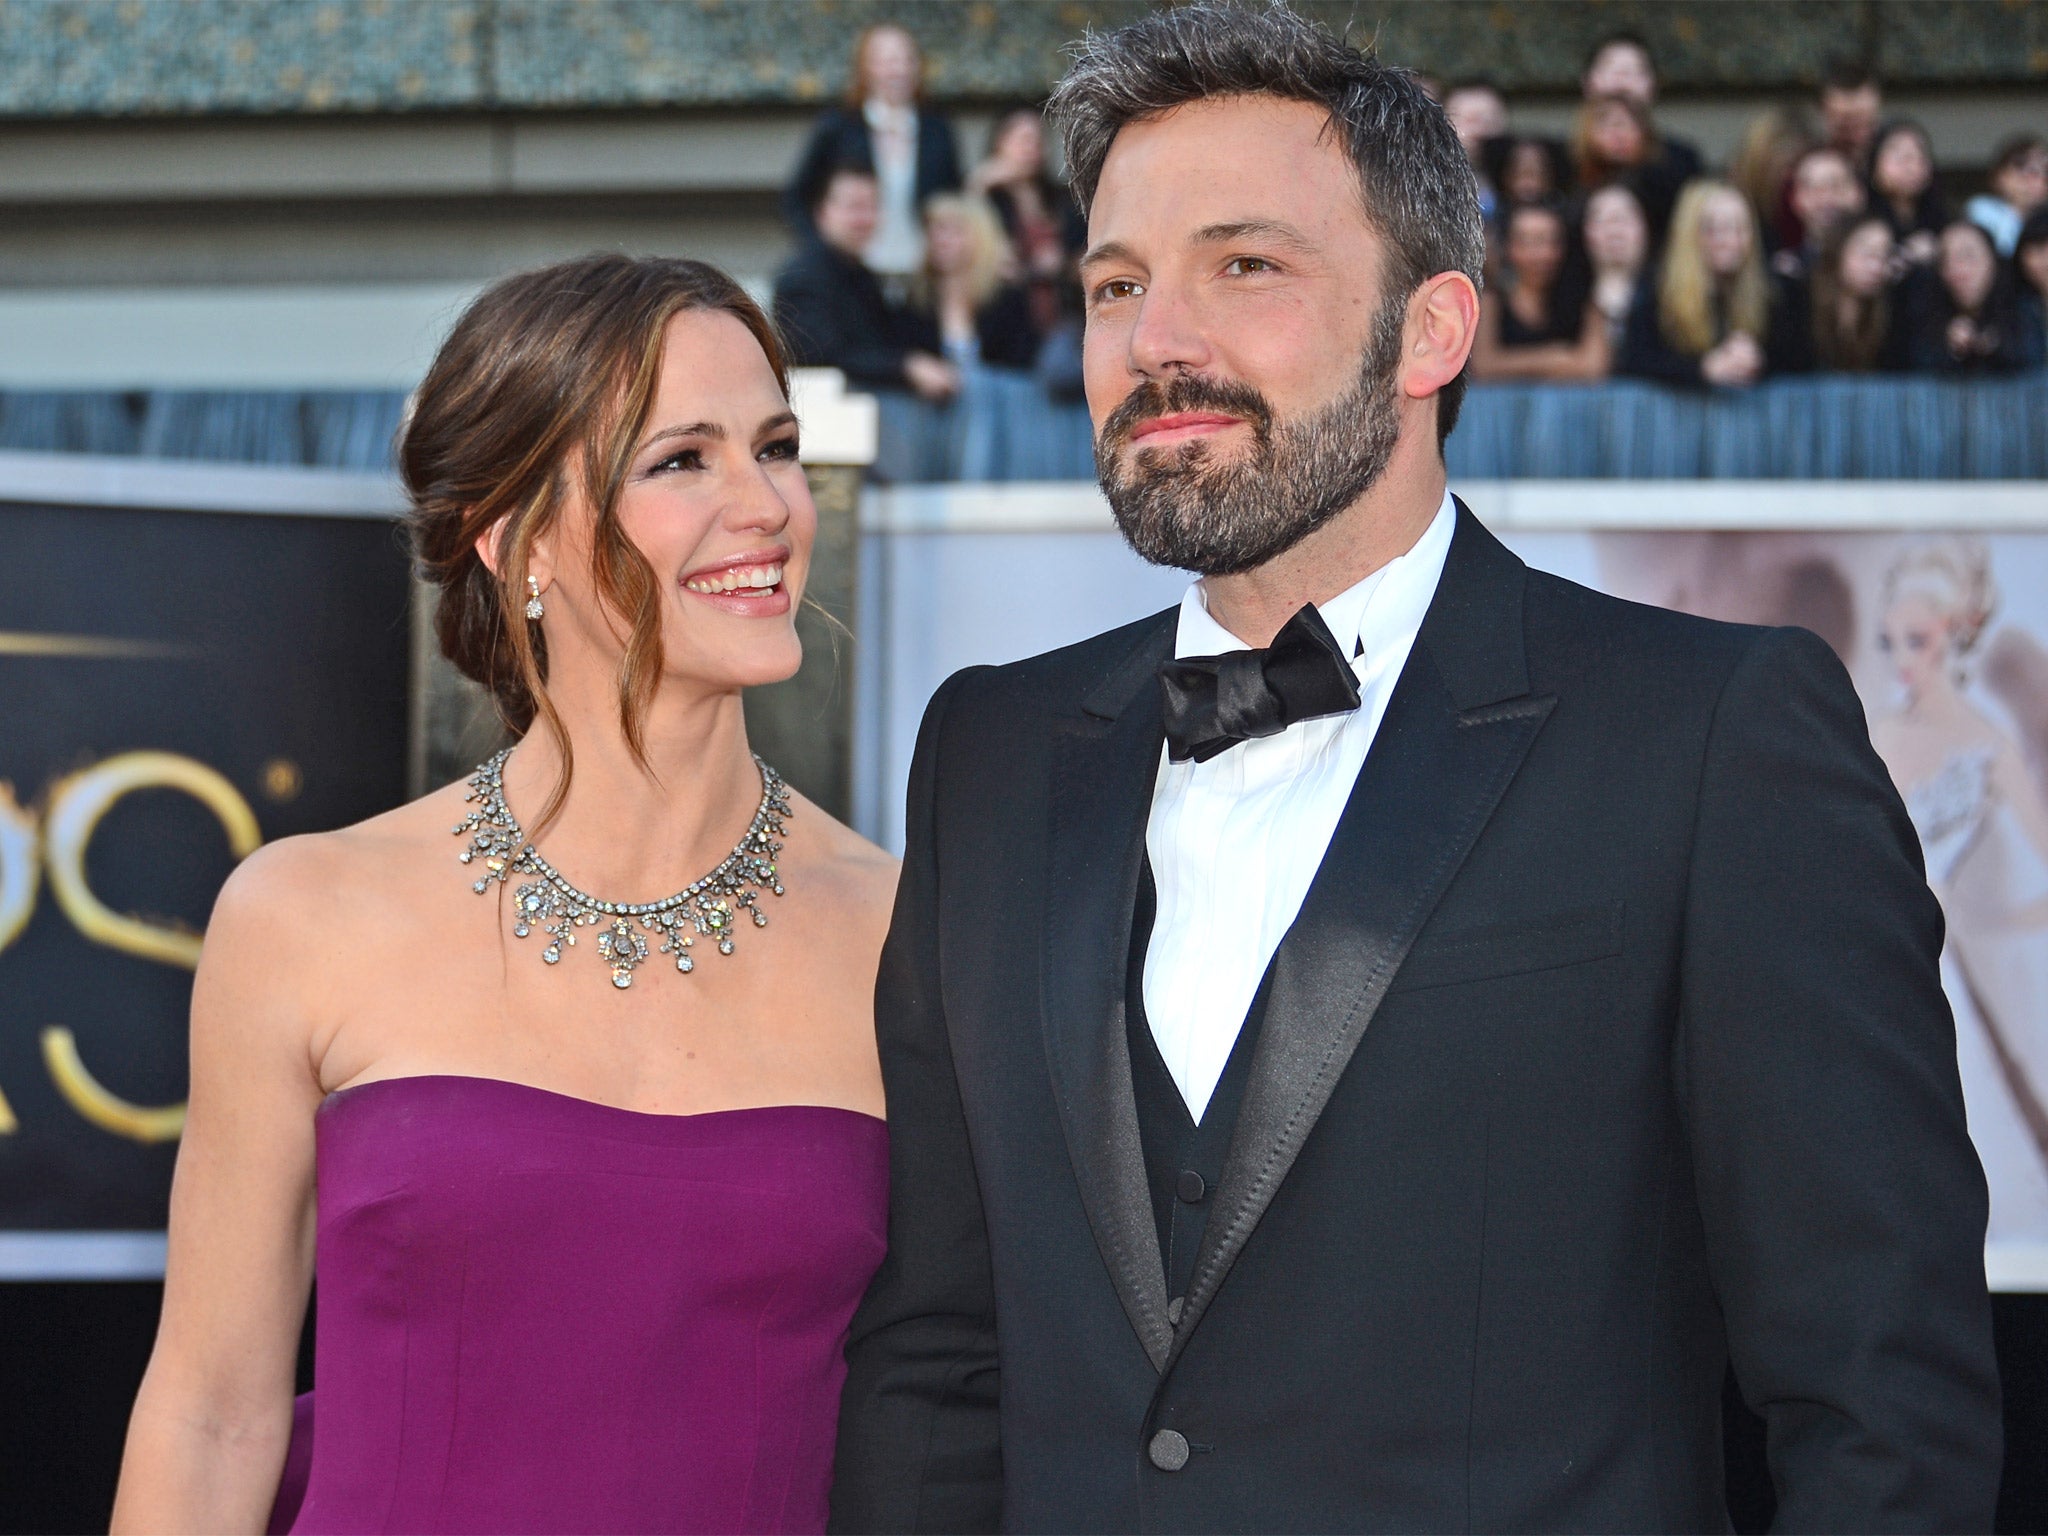 Food for thought: Ben Affleck to ‘Live Below the Line’ with $1.50 daily ...